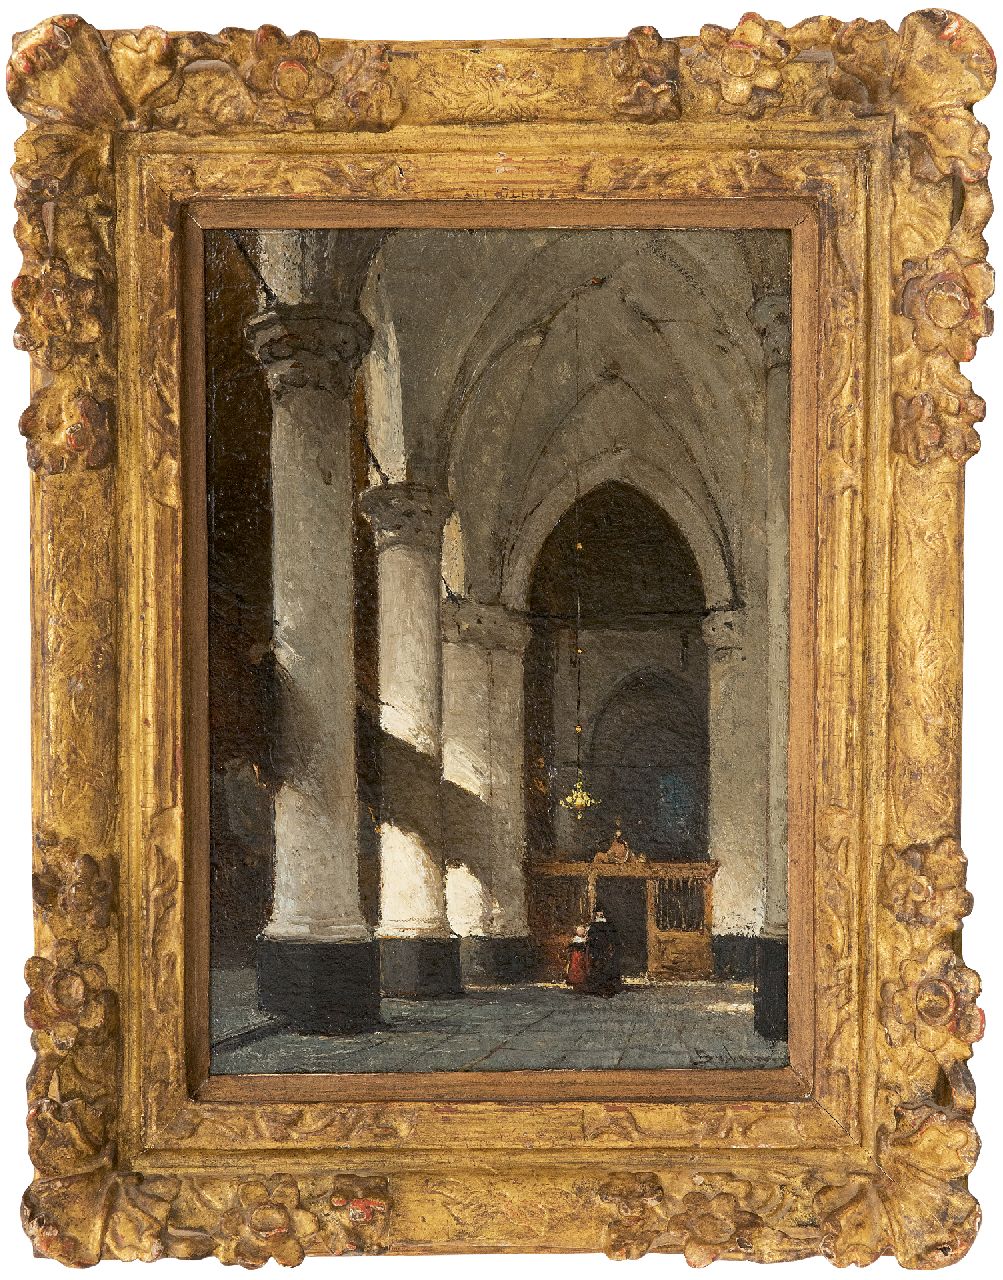 Bosboom J.  | Johannes Bosboom | Paintings offered for sale | The interior of the Grote or Sint-Jacobschurch in The Hague, oil on panel 24.5 x 17.6 cm, signed l.r.